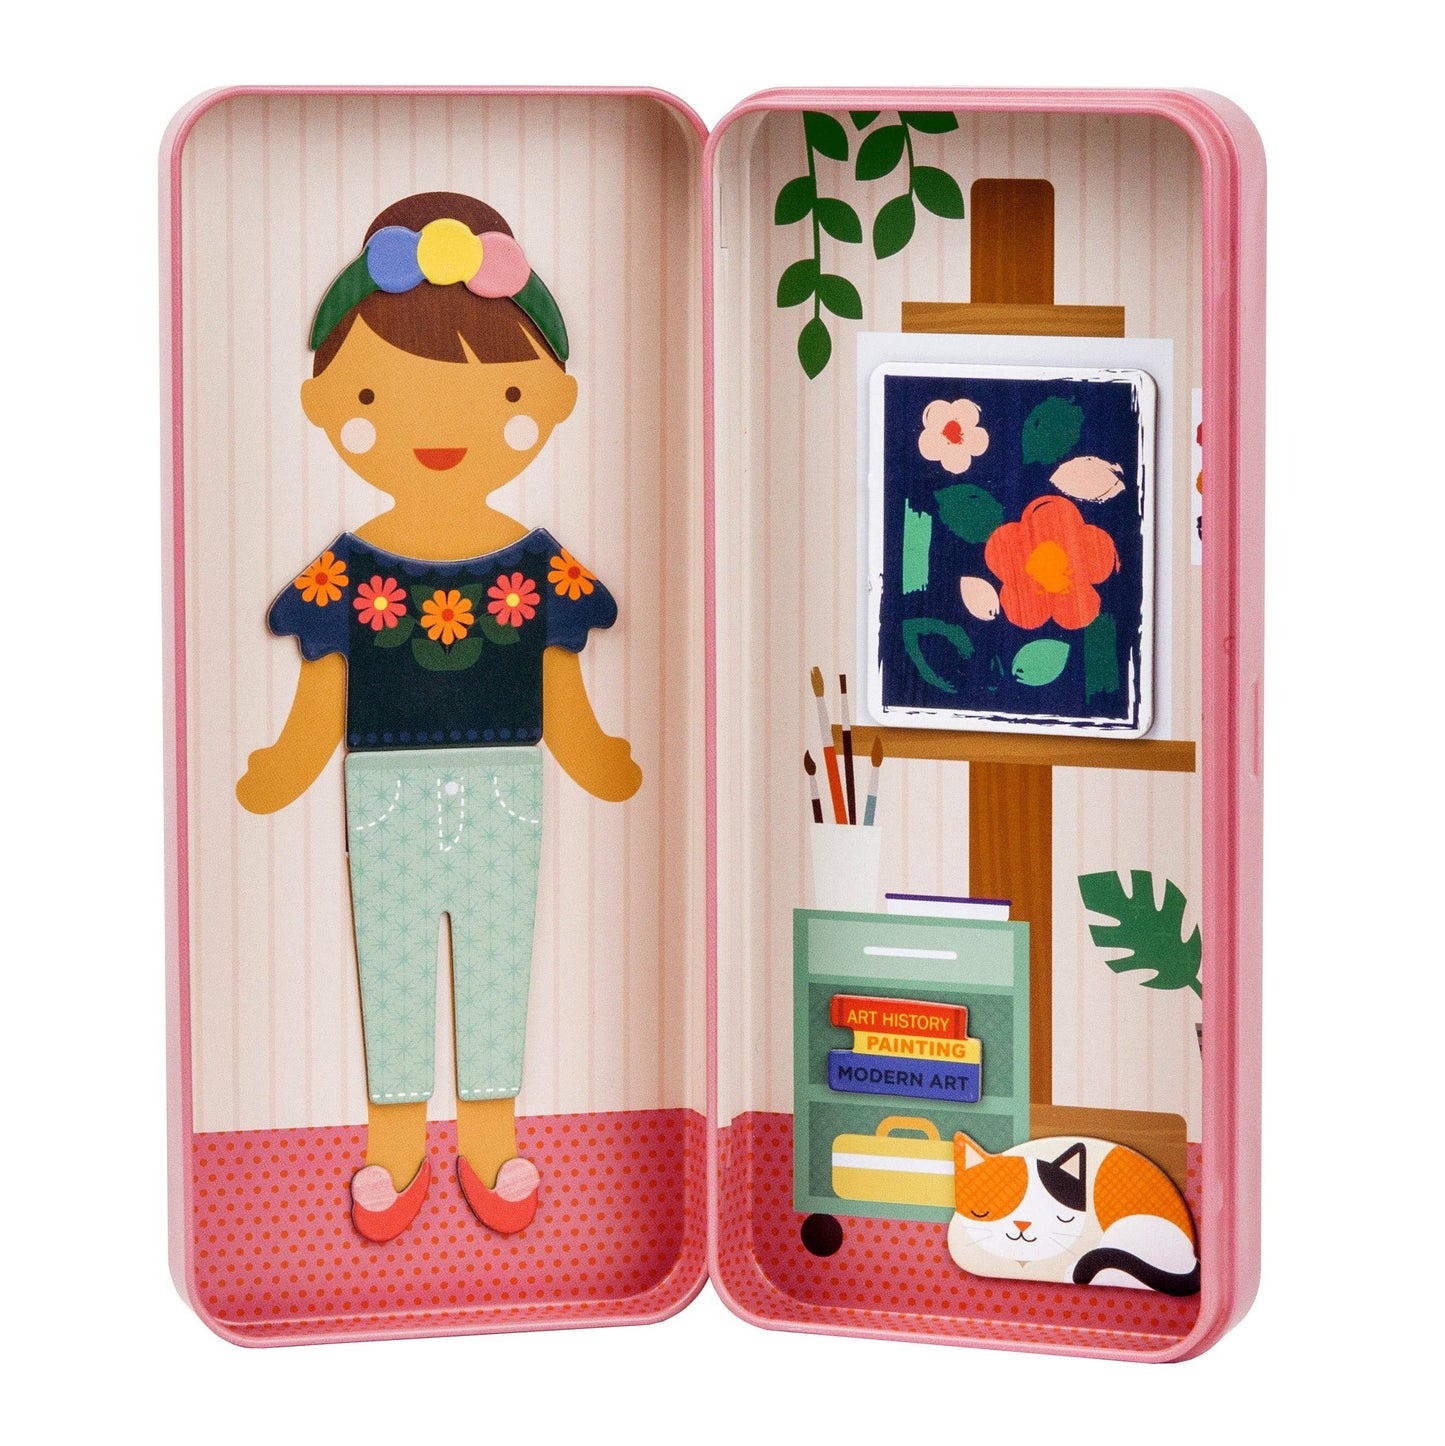 At The Studio Shine Bright Magnetic Play Set